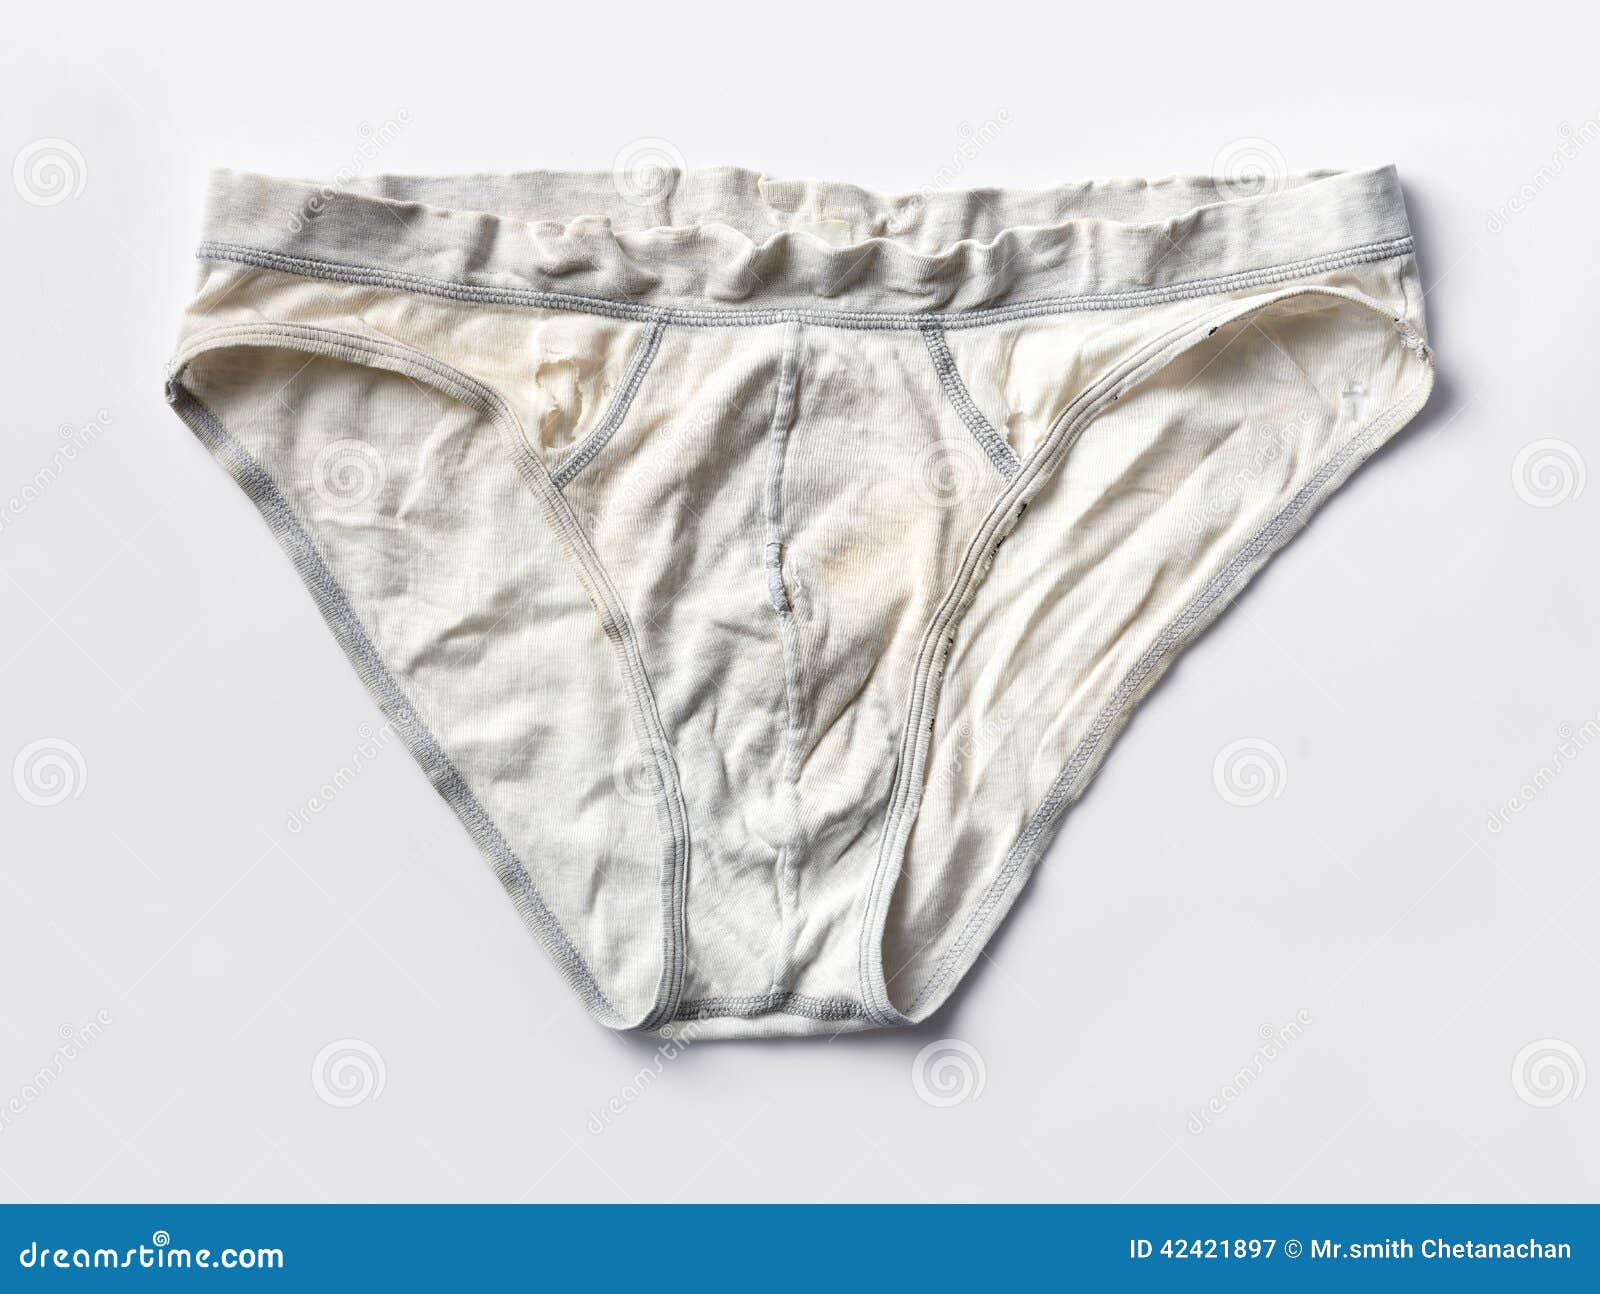 Elvis' Underwear Goes Up for Auction